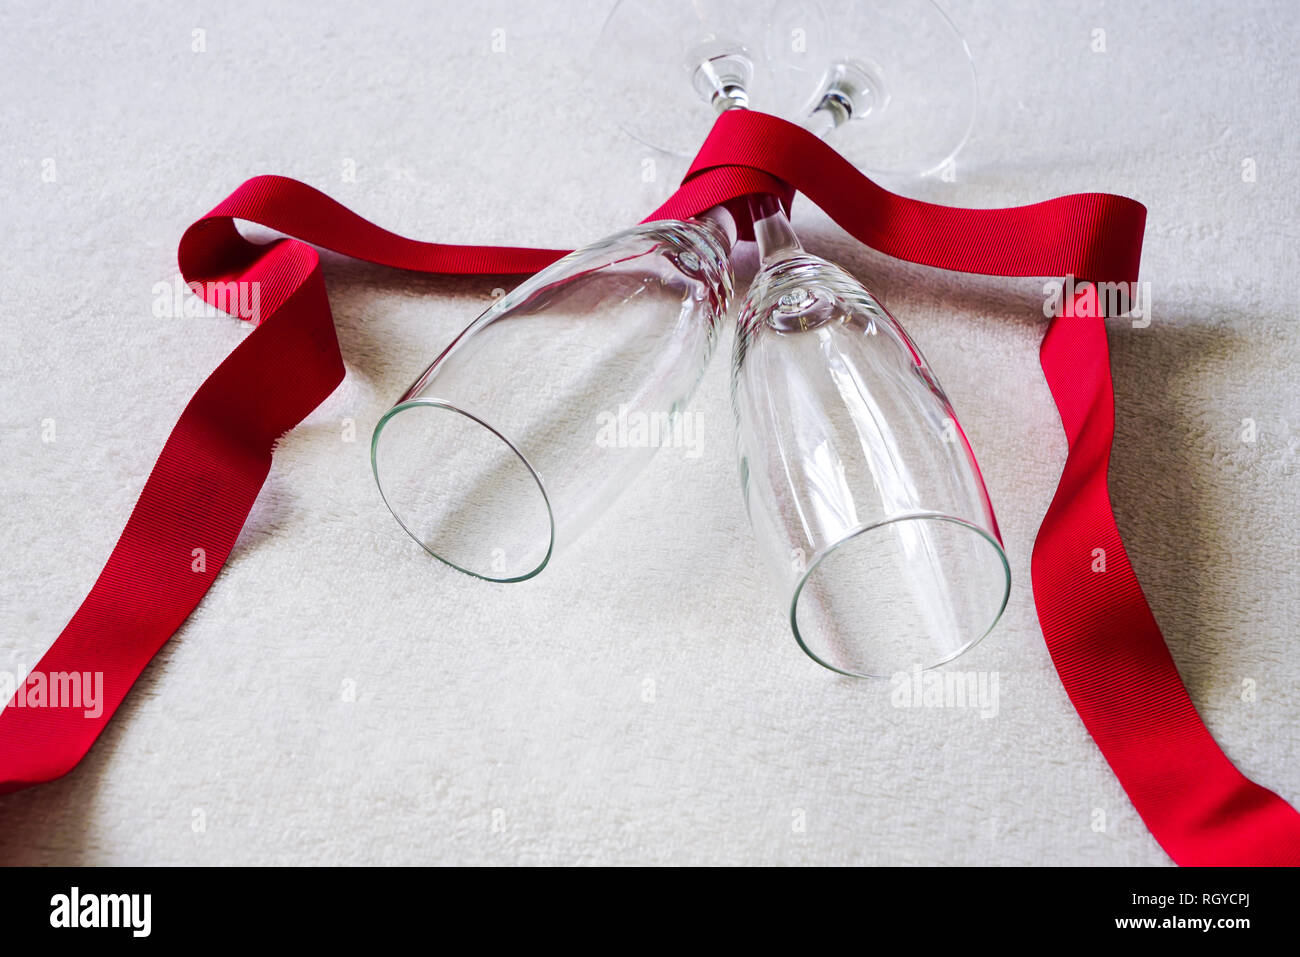 Champagne flutes wrapped in red ribbon in a fluffy white background. Concept of Valentine's Day or romantic celebration. Stock Photo